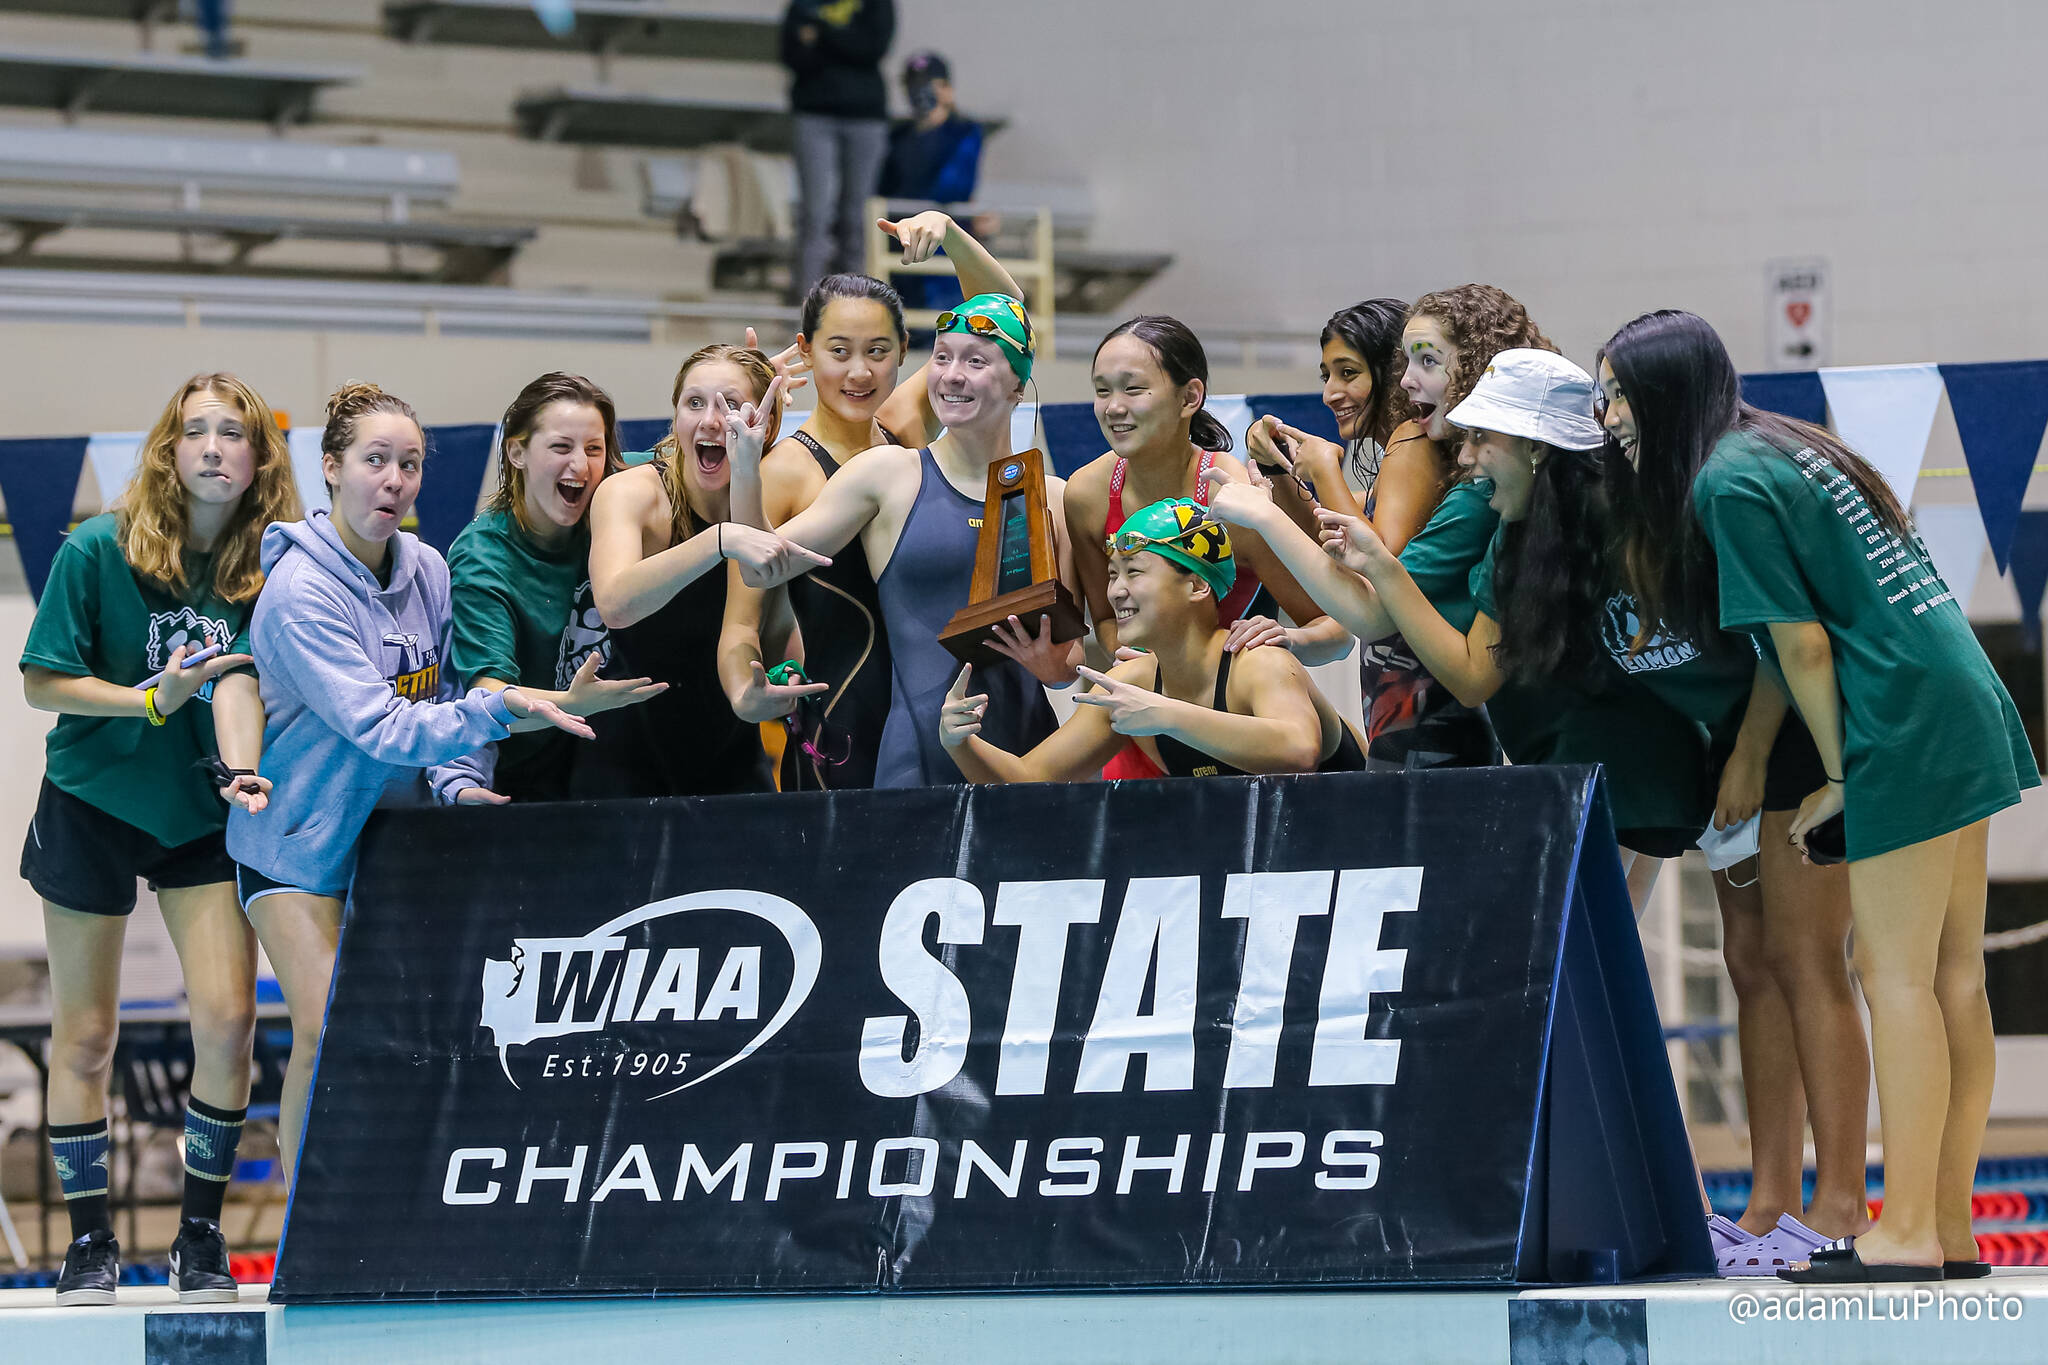 Redmond High’s girls swim team took third place at the 4A state meet on Nov. 13 at the King County Aquatics Center in Federal Way. Photo courtesy of Adam Lu